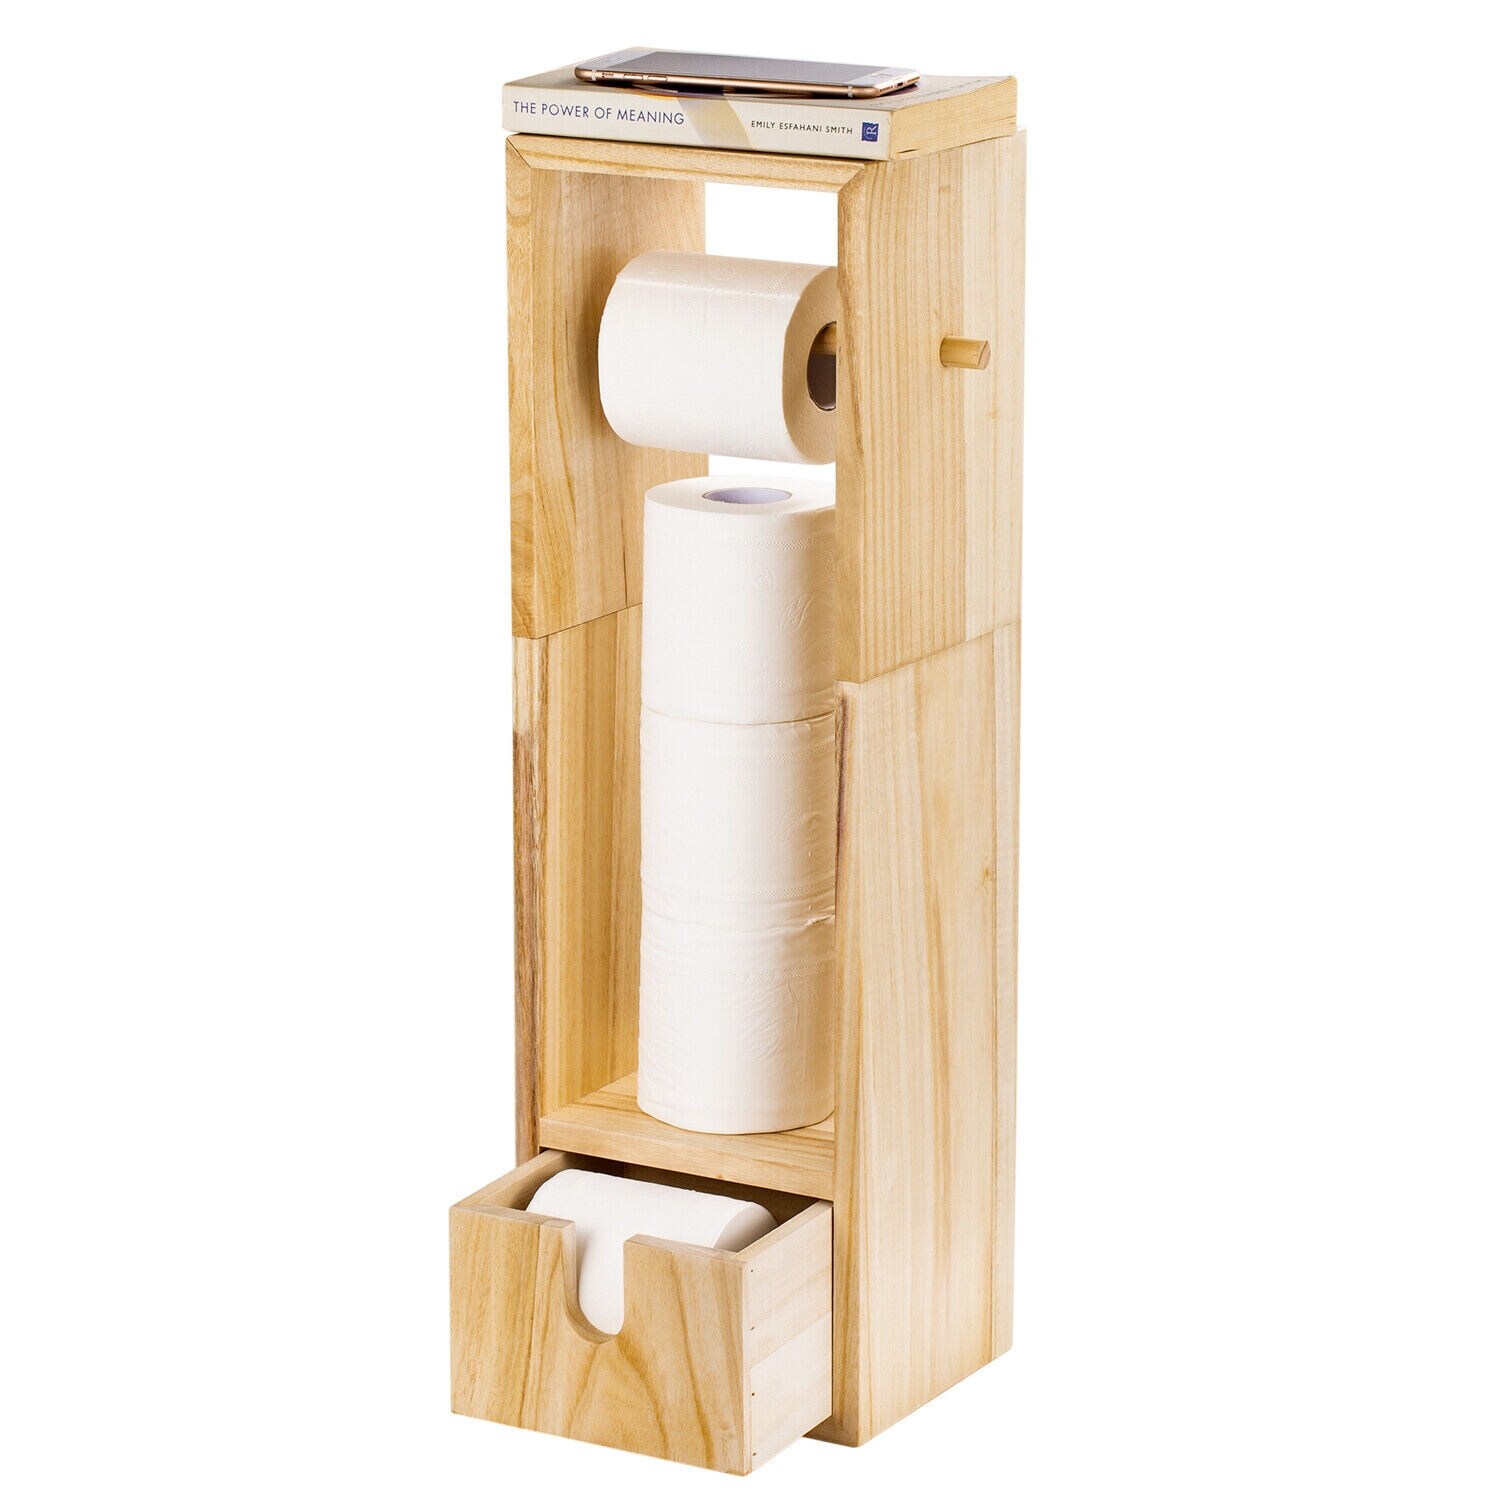 https://ak1.ostkcdn.com/images/products/is/images/direct/4fd711b5f4619109226cd5330bb51332bcd253c6/Wood-Free-Standing-Toilet-Paper-Roll-Holder-with-Drawer.jpg